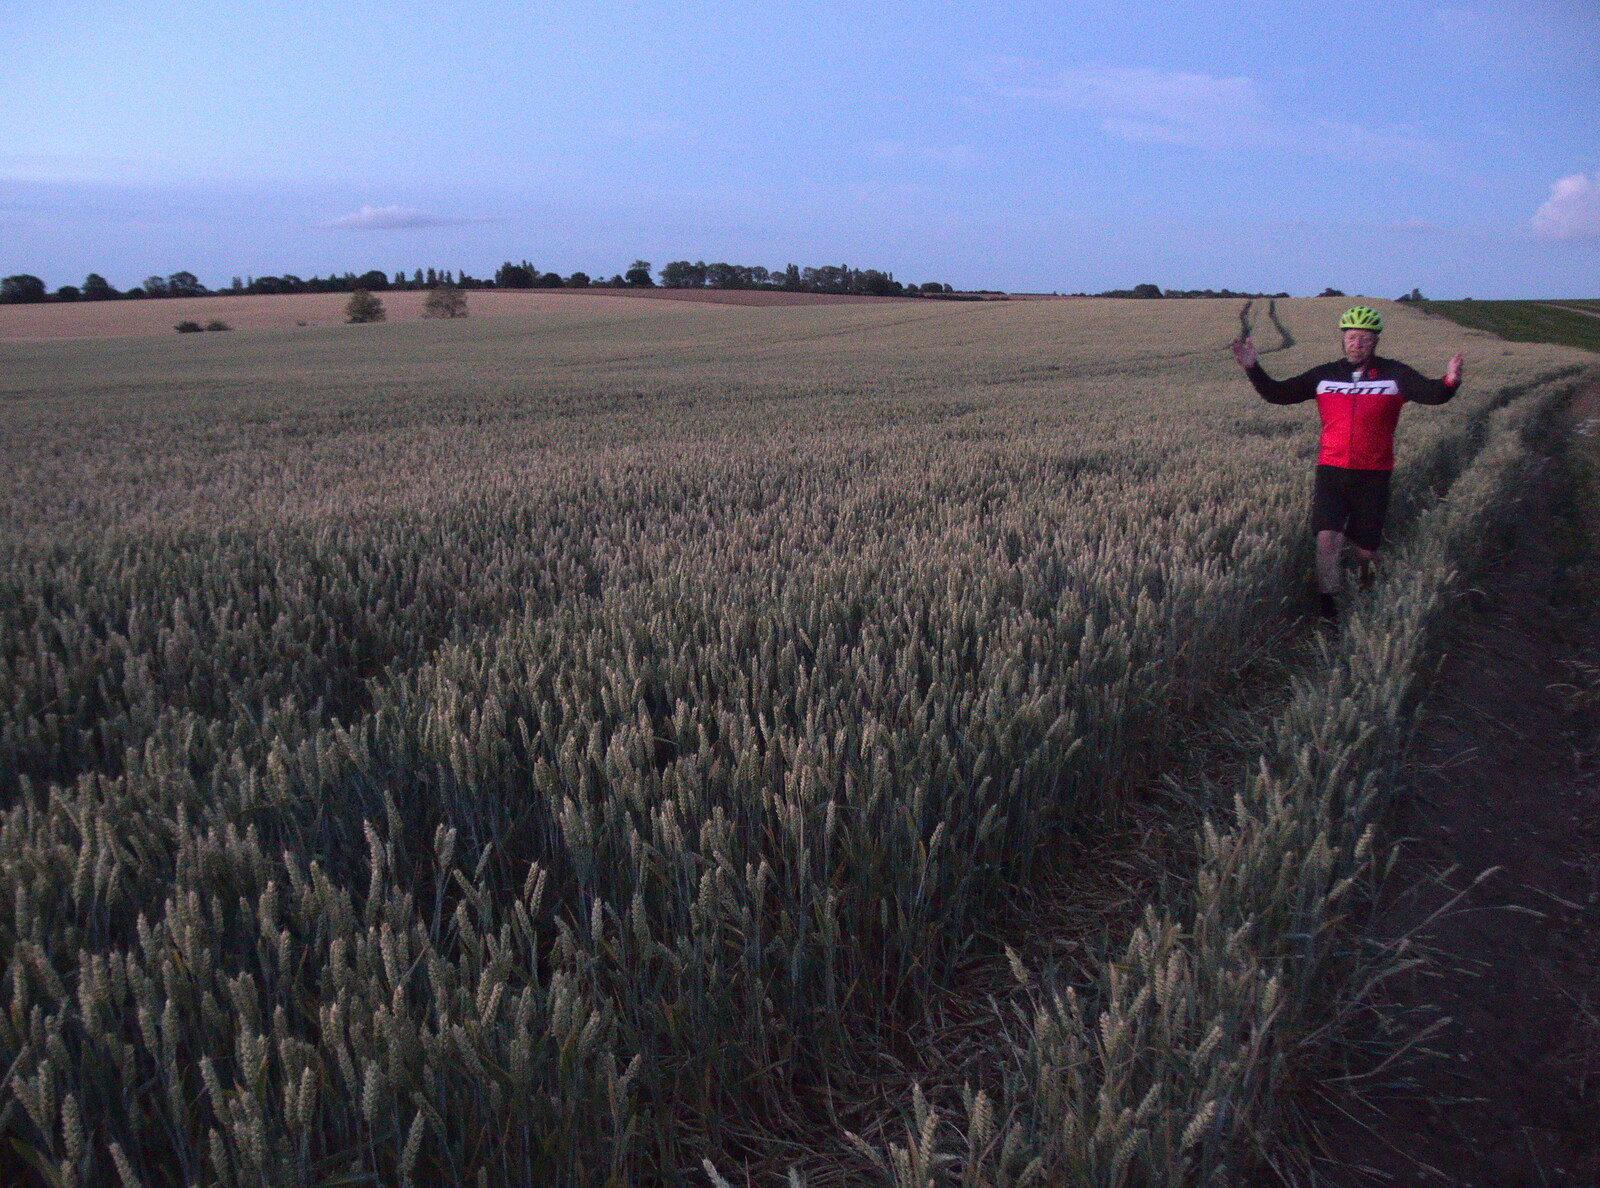 Gaz roams around in a wheat field from A Fire, a Fête, and a Scout Camp, Hallowtree, Suffolk - 30th June 2022